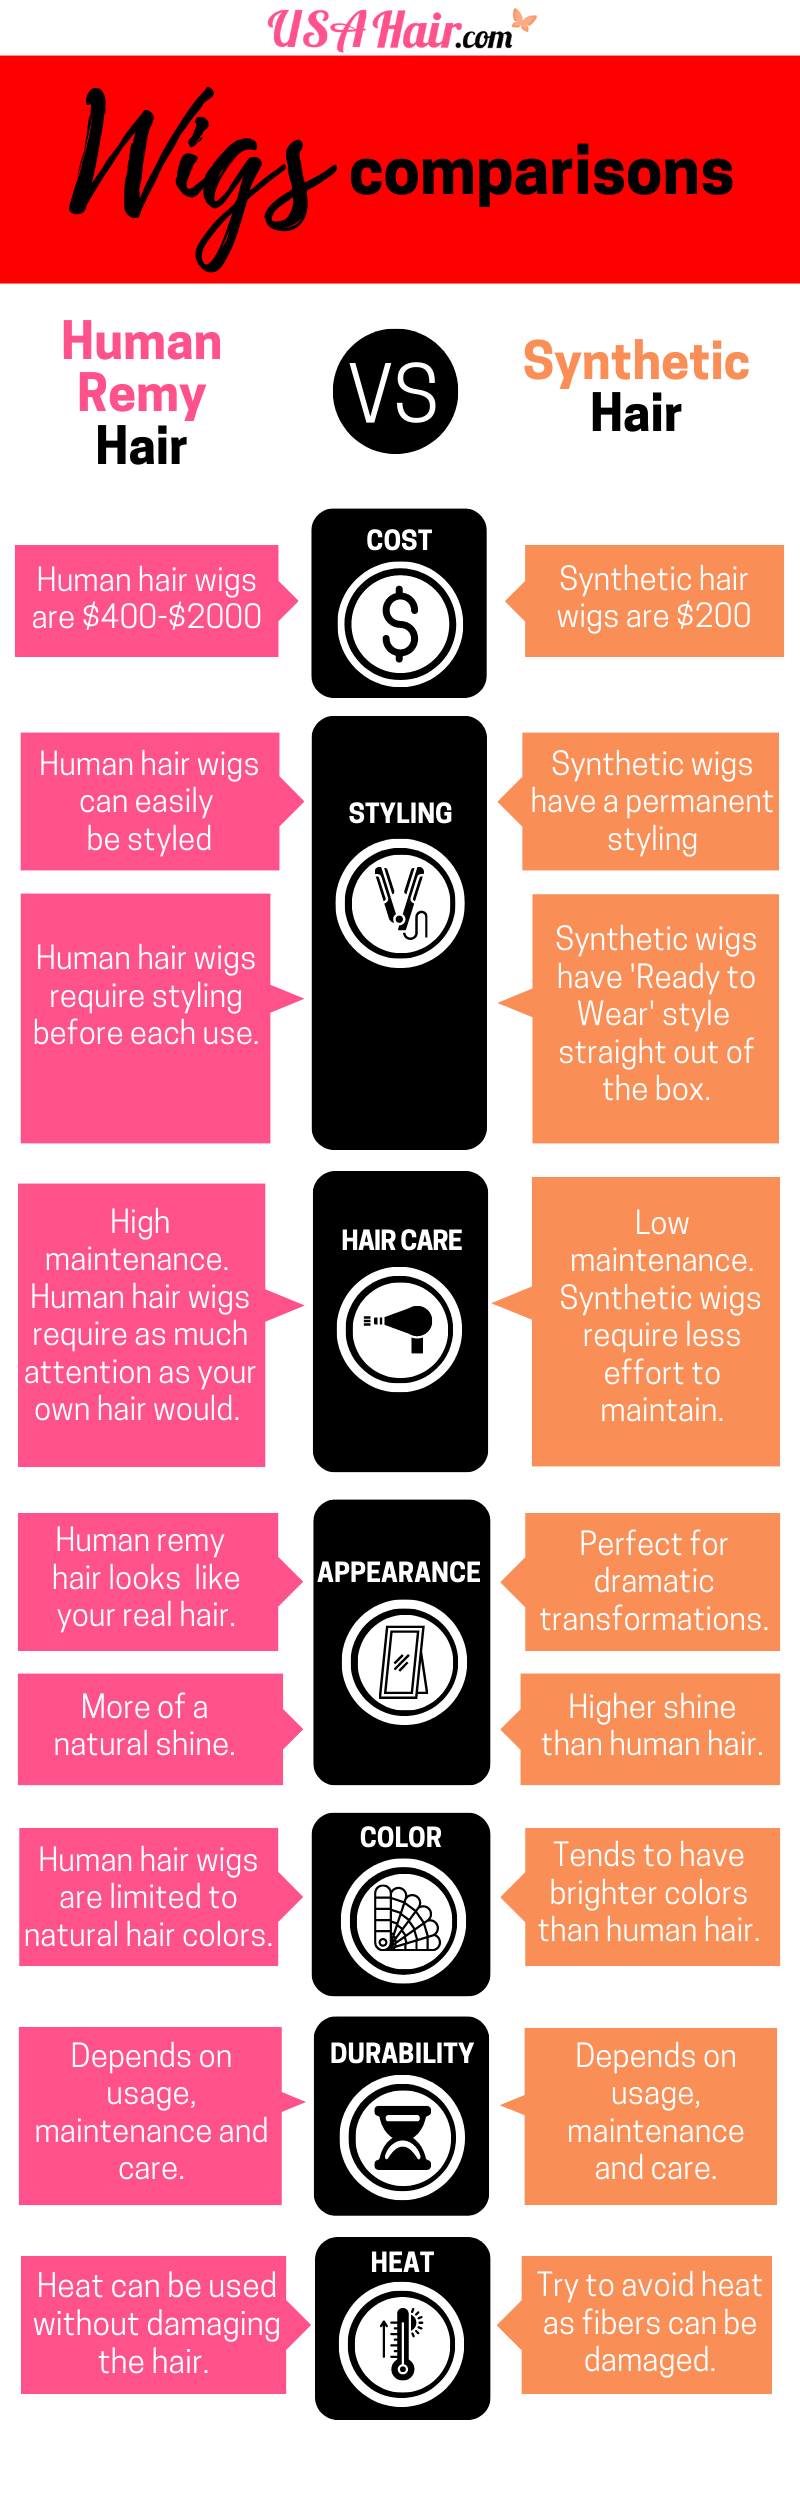 USA Human hair VS synthetic Comparison Infographic \(800 x 5000 px\).png